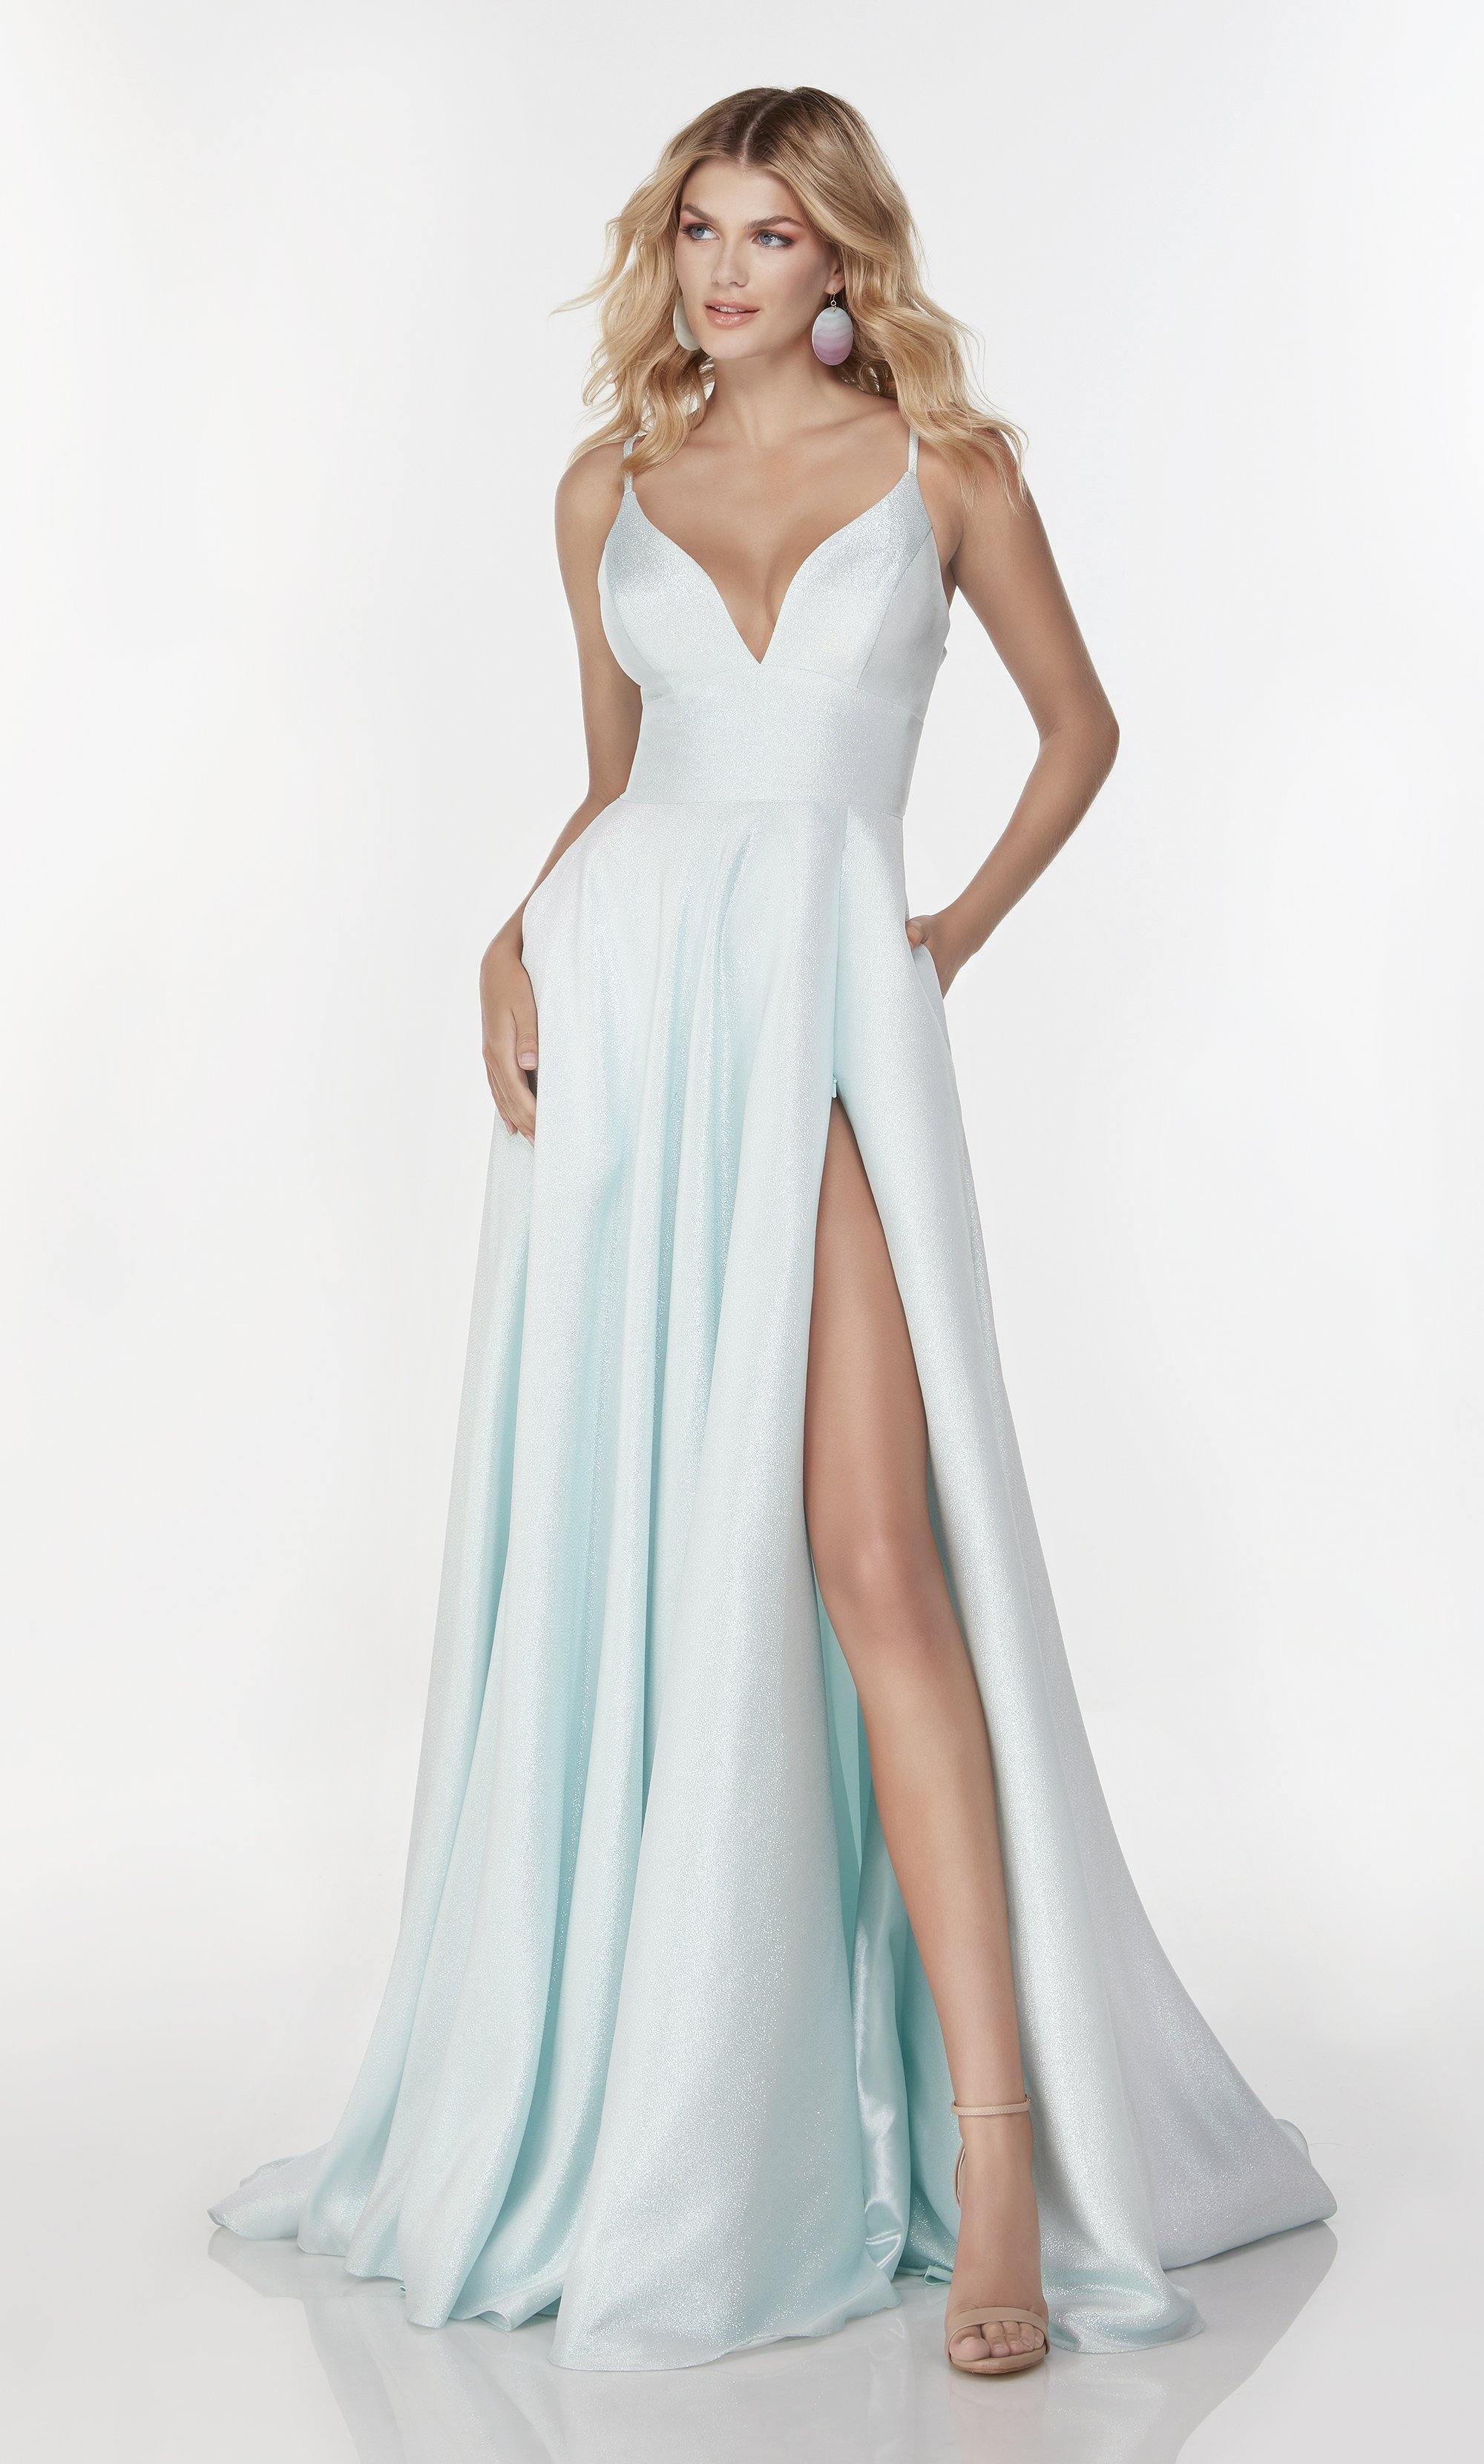 High neck line and low back evening dress